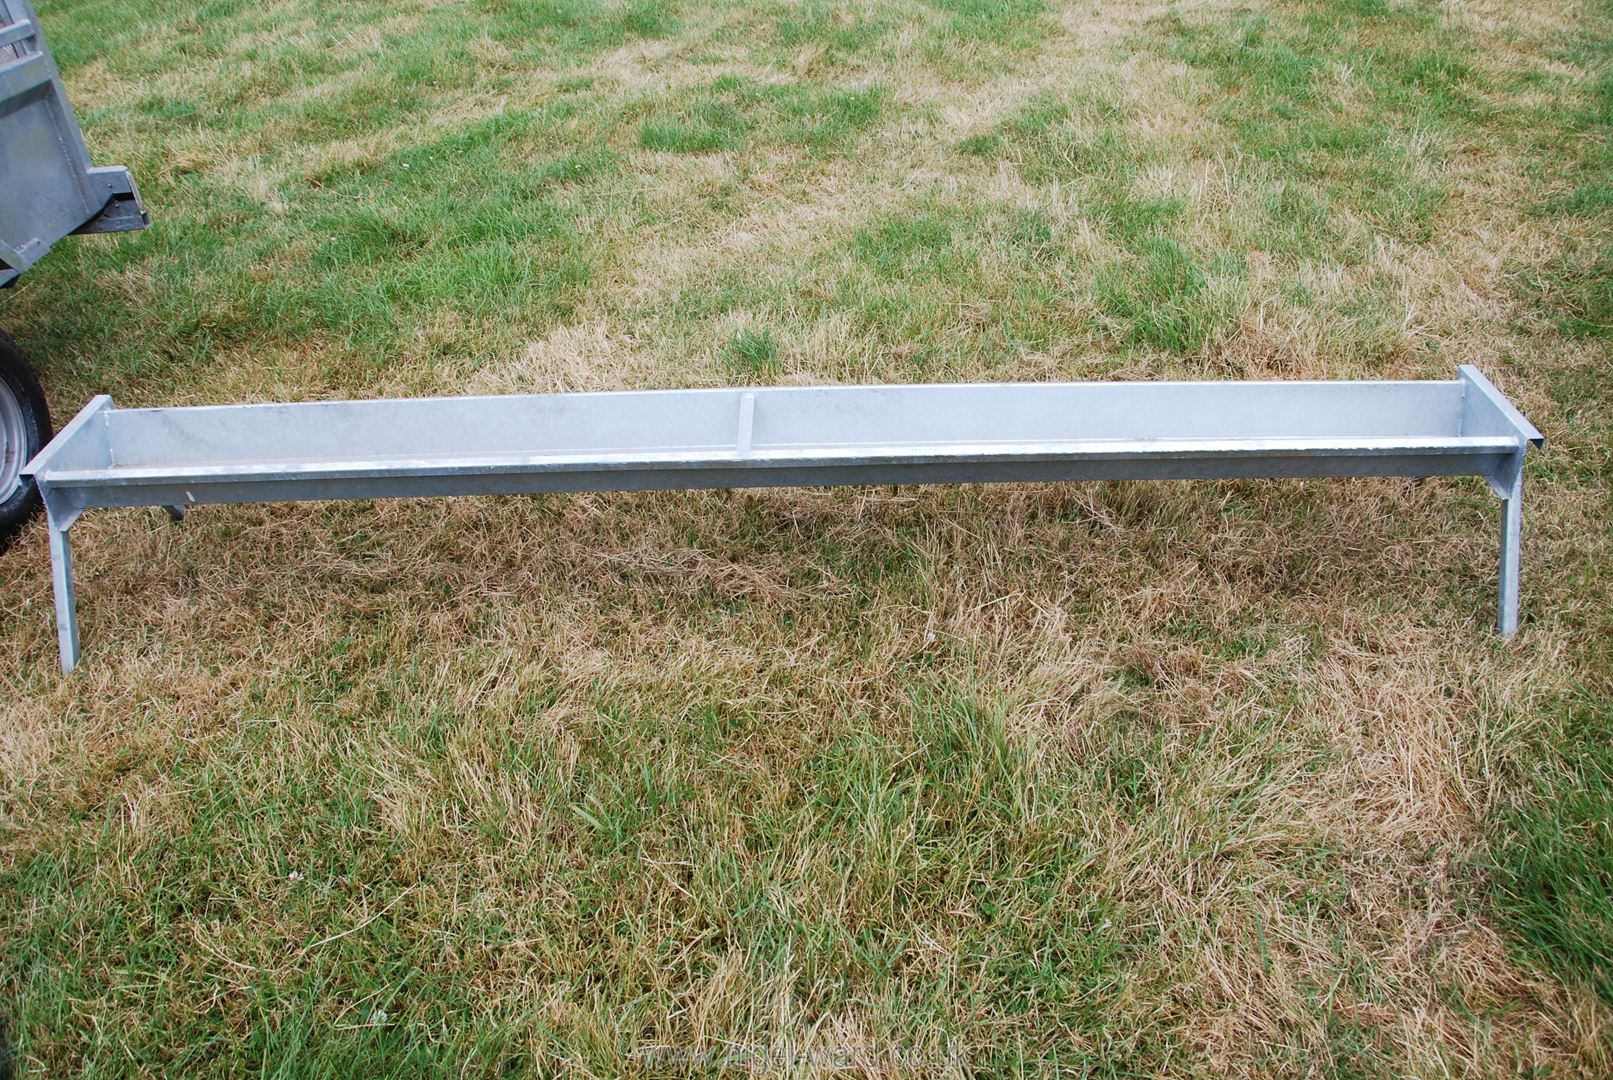 A new galvanised Sheep trough.